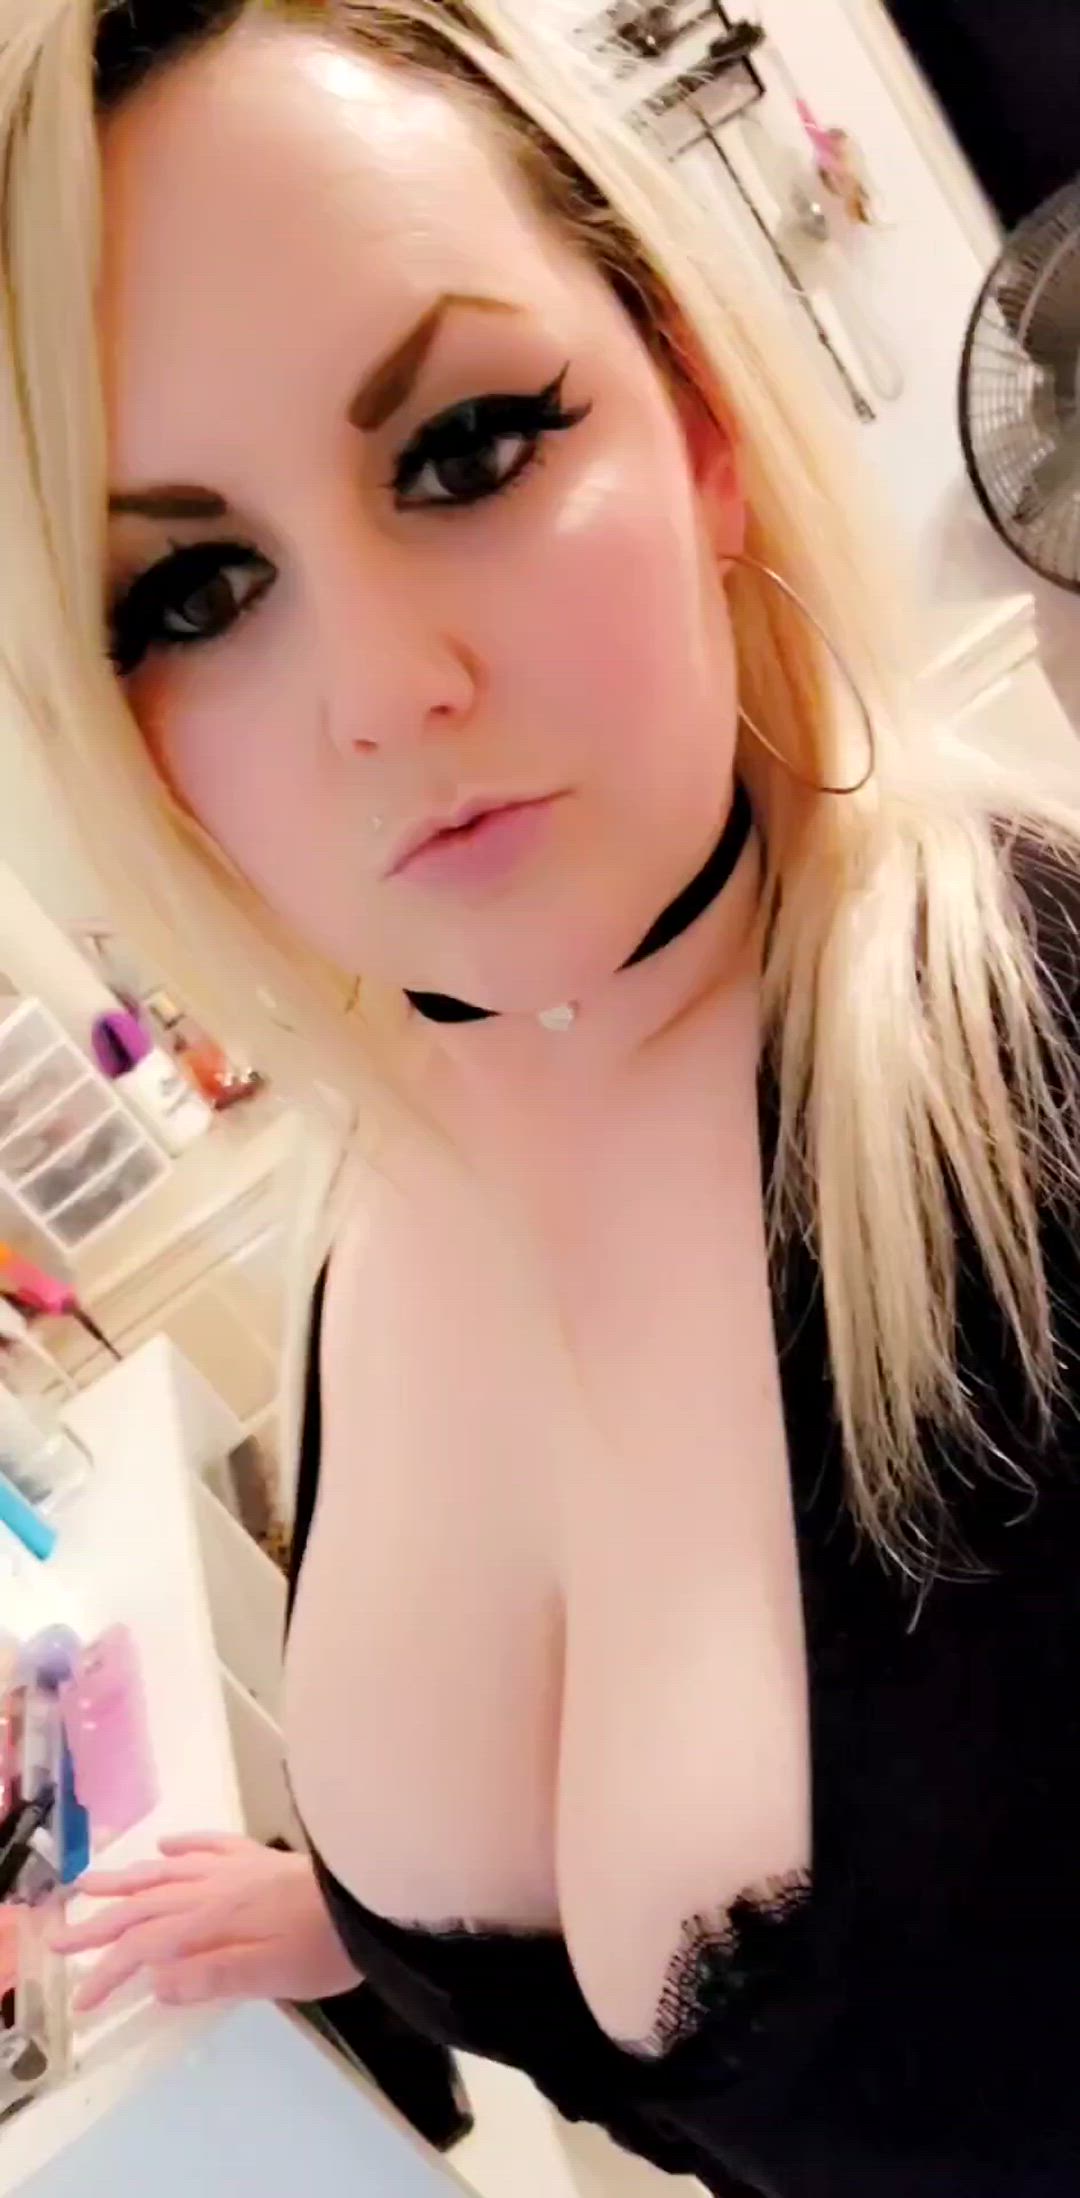 Tits porn video with onlyfans model juicyjewelsjugs <strong>@juicyjewelsjugs</strong>